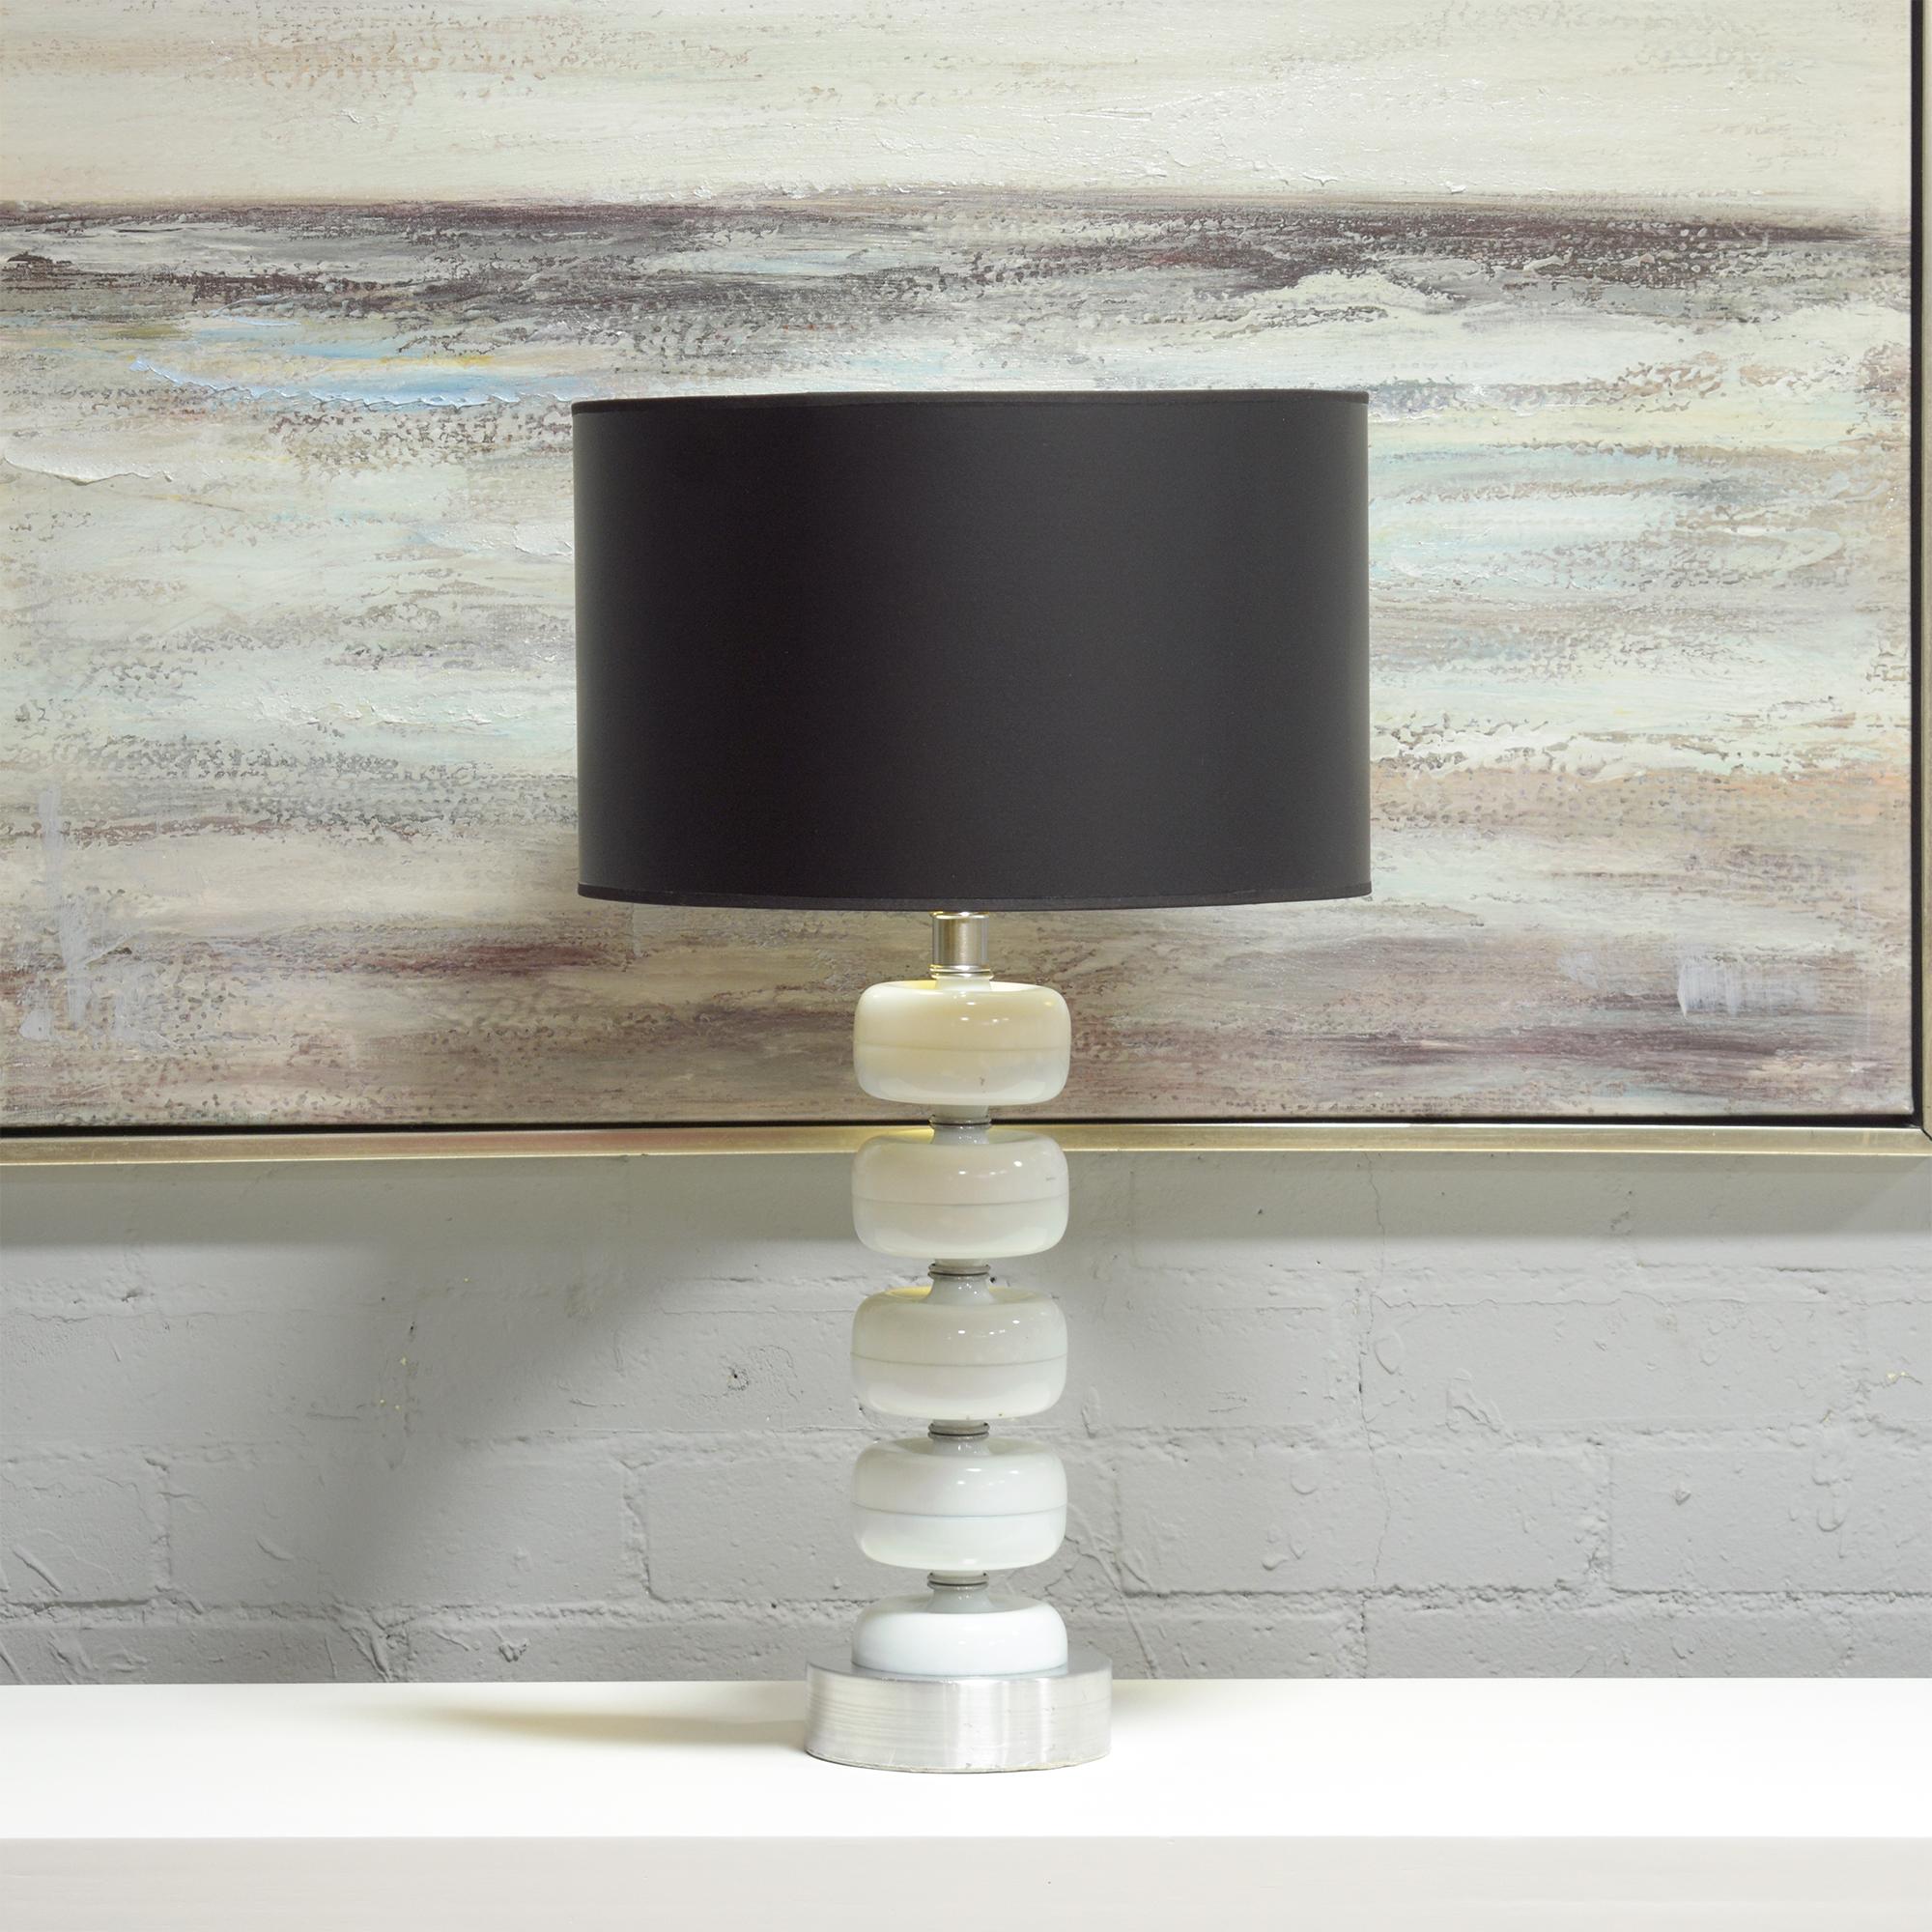 Dive into the exquisite world of mid-century design with our pair of mid-century modern table lamps, a remarkable representation of the period's artistic flair and innovation. Hand-crafted with precision, these lamps merge the delicate transparency